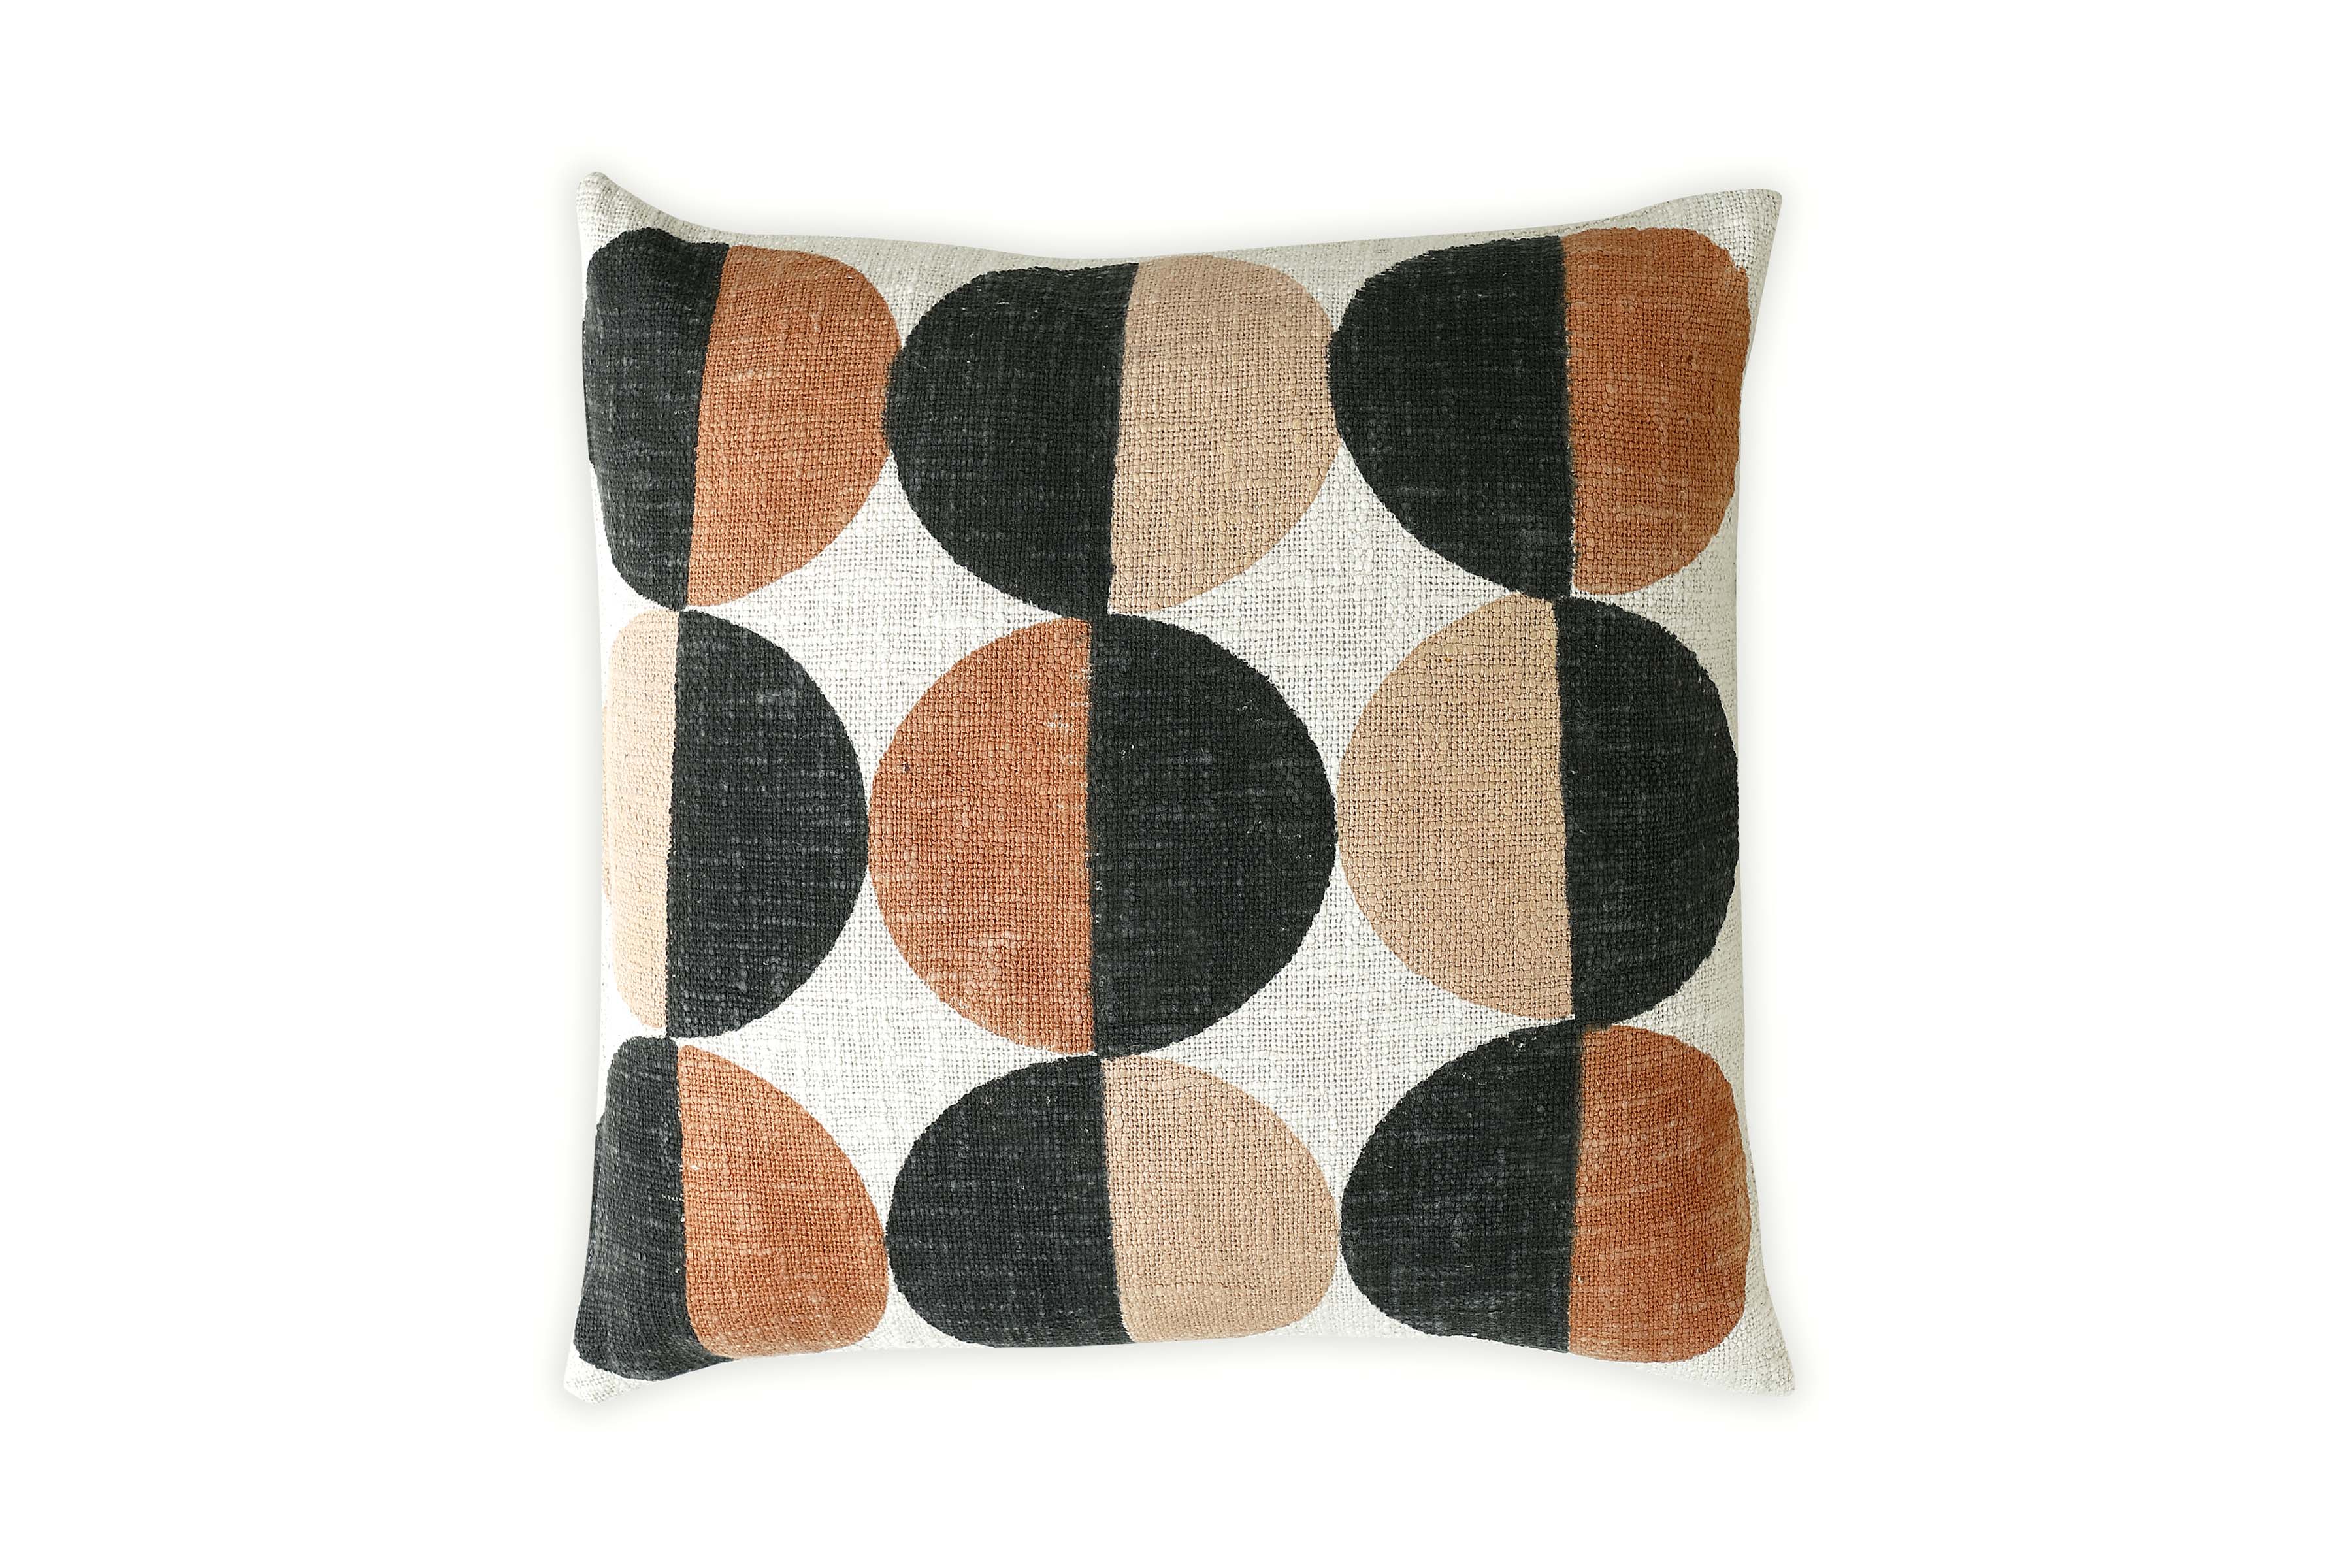 Geo Shapes Handcrafted Throw Pillow, Earth - 18x18 inch Without Filler